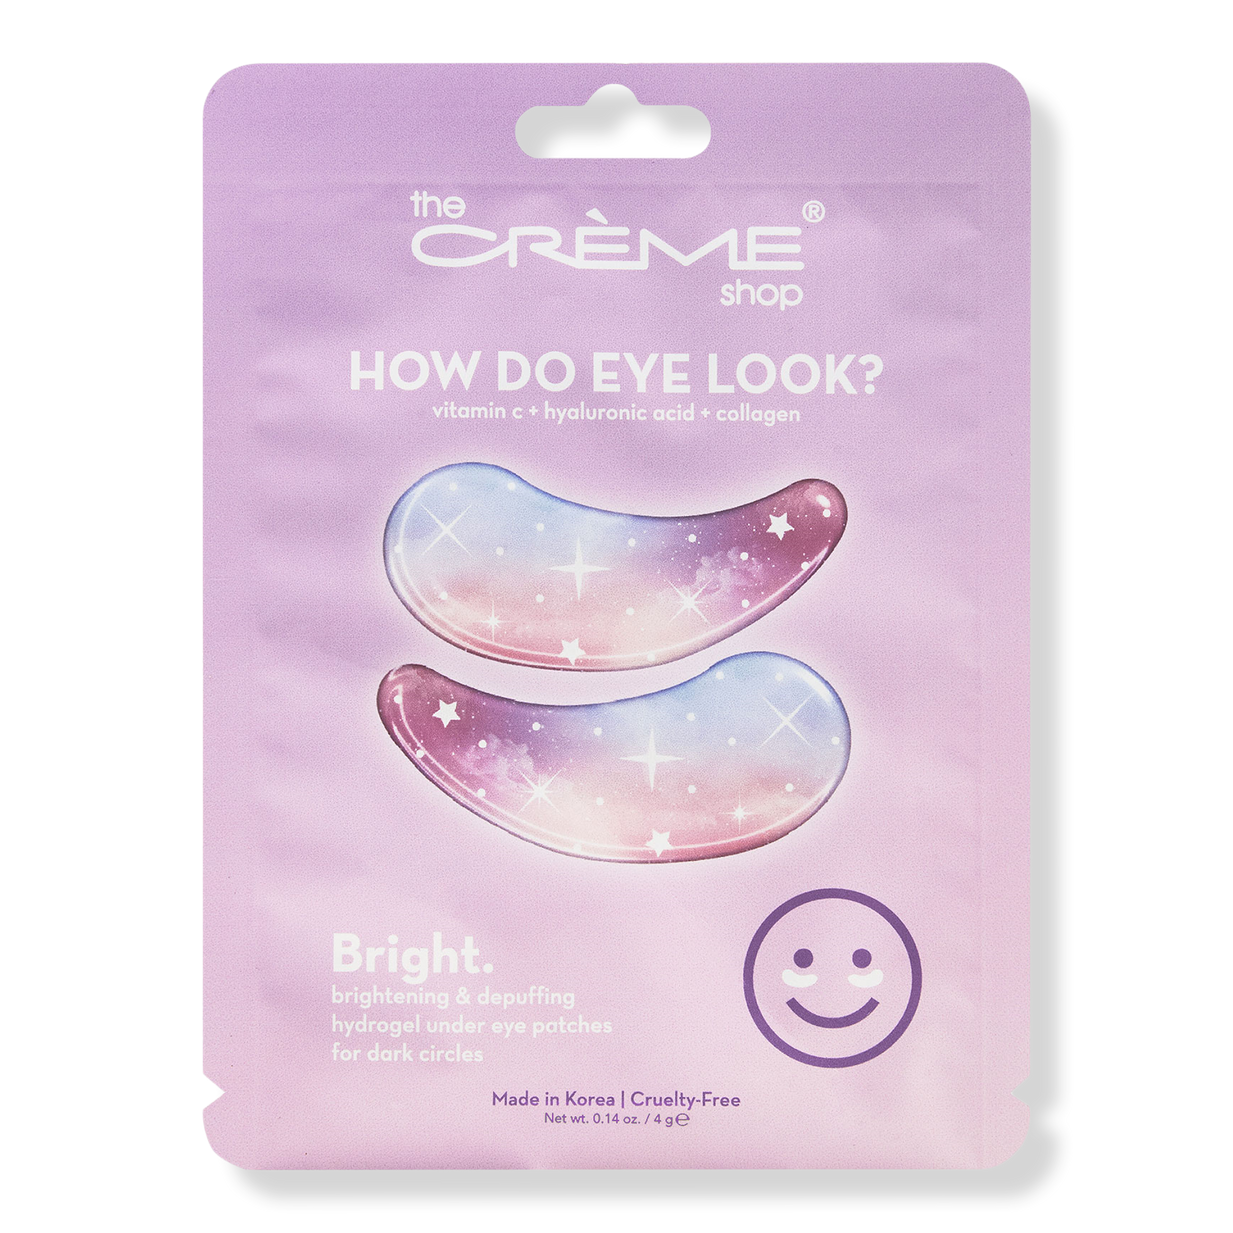 How Do Eye Look? Bright Hydrogel Eye Patches